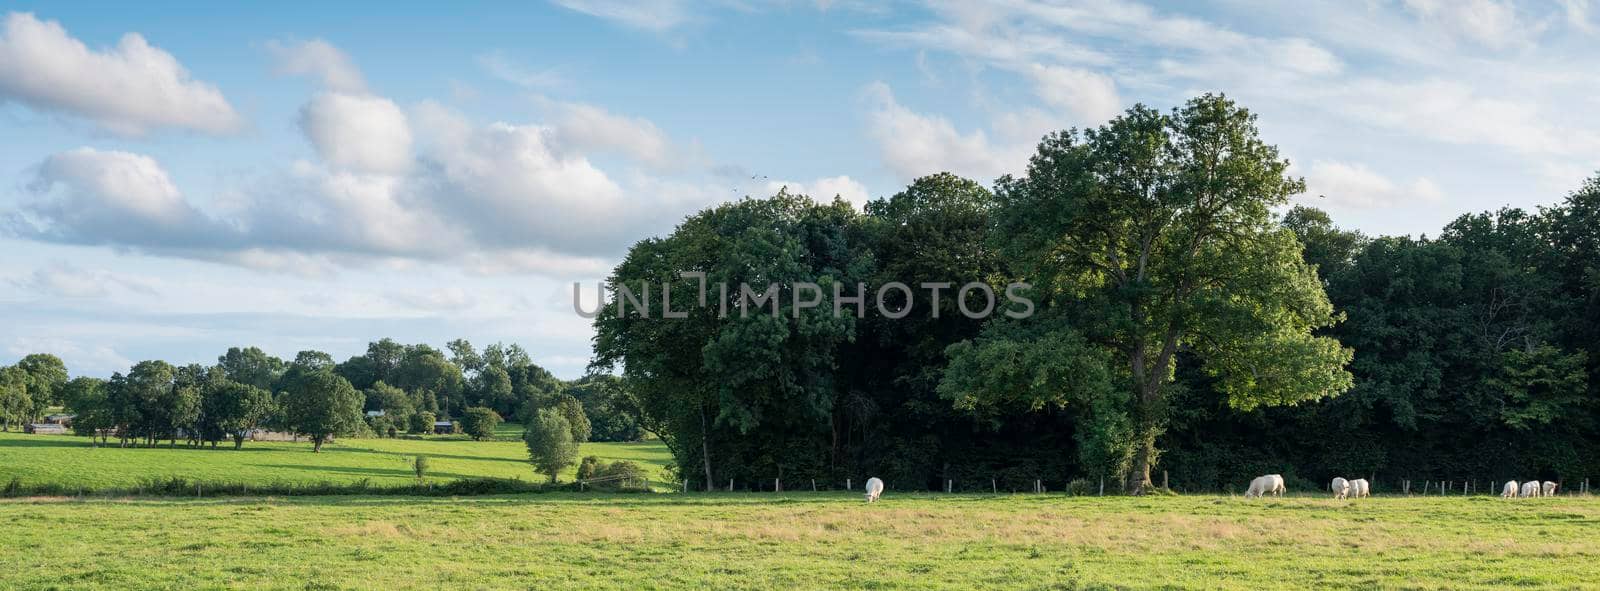 cows and trees near meadow with cows in french natural park boucles de la seine between rouen and le havre in france under blue summer sky